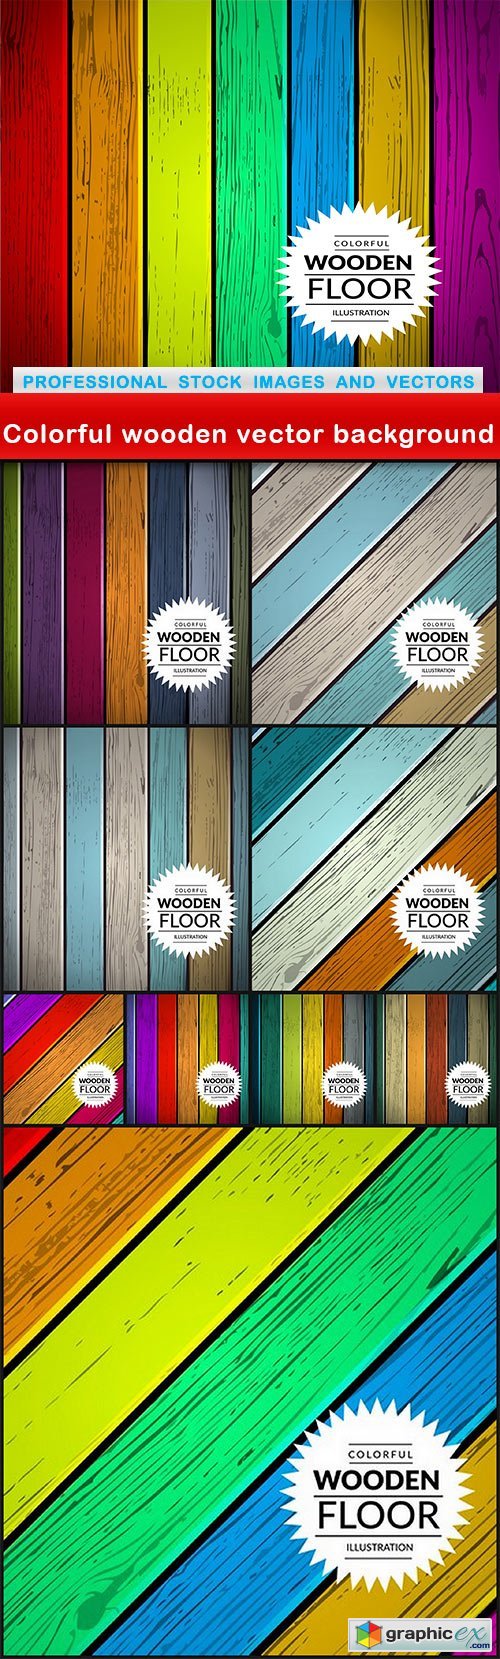 Colorful wooden vector background - 10 EPS